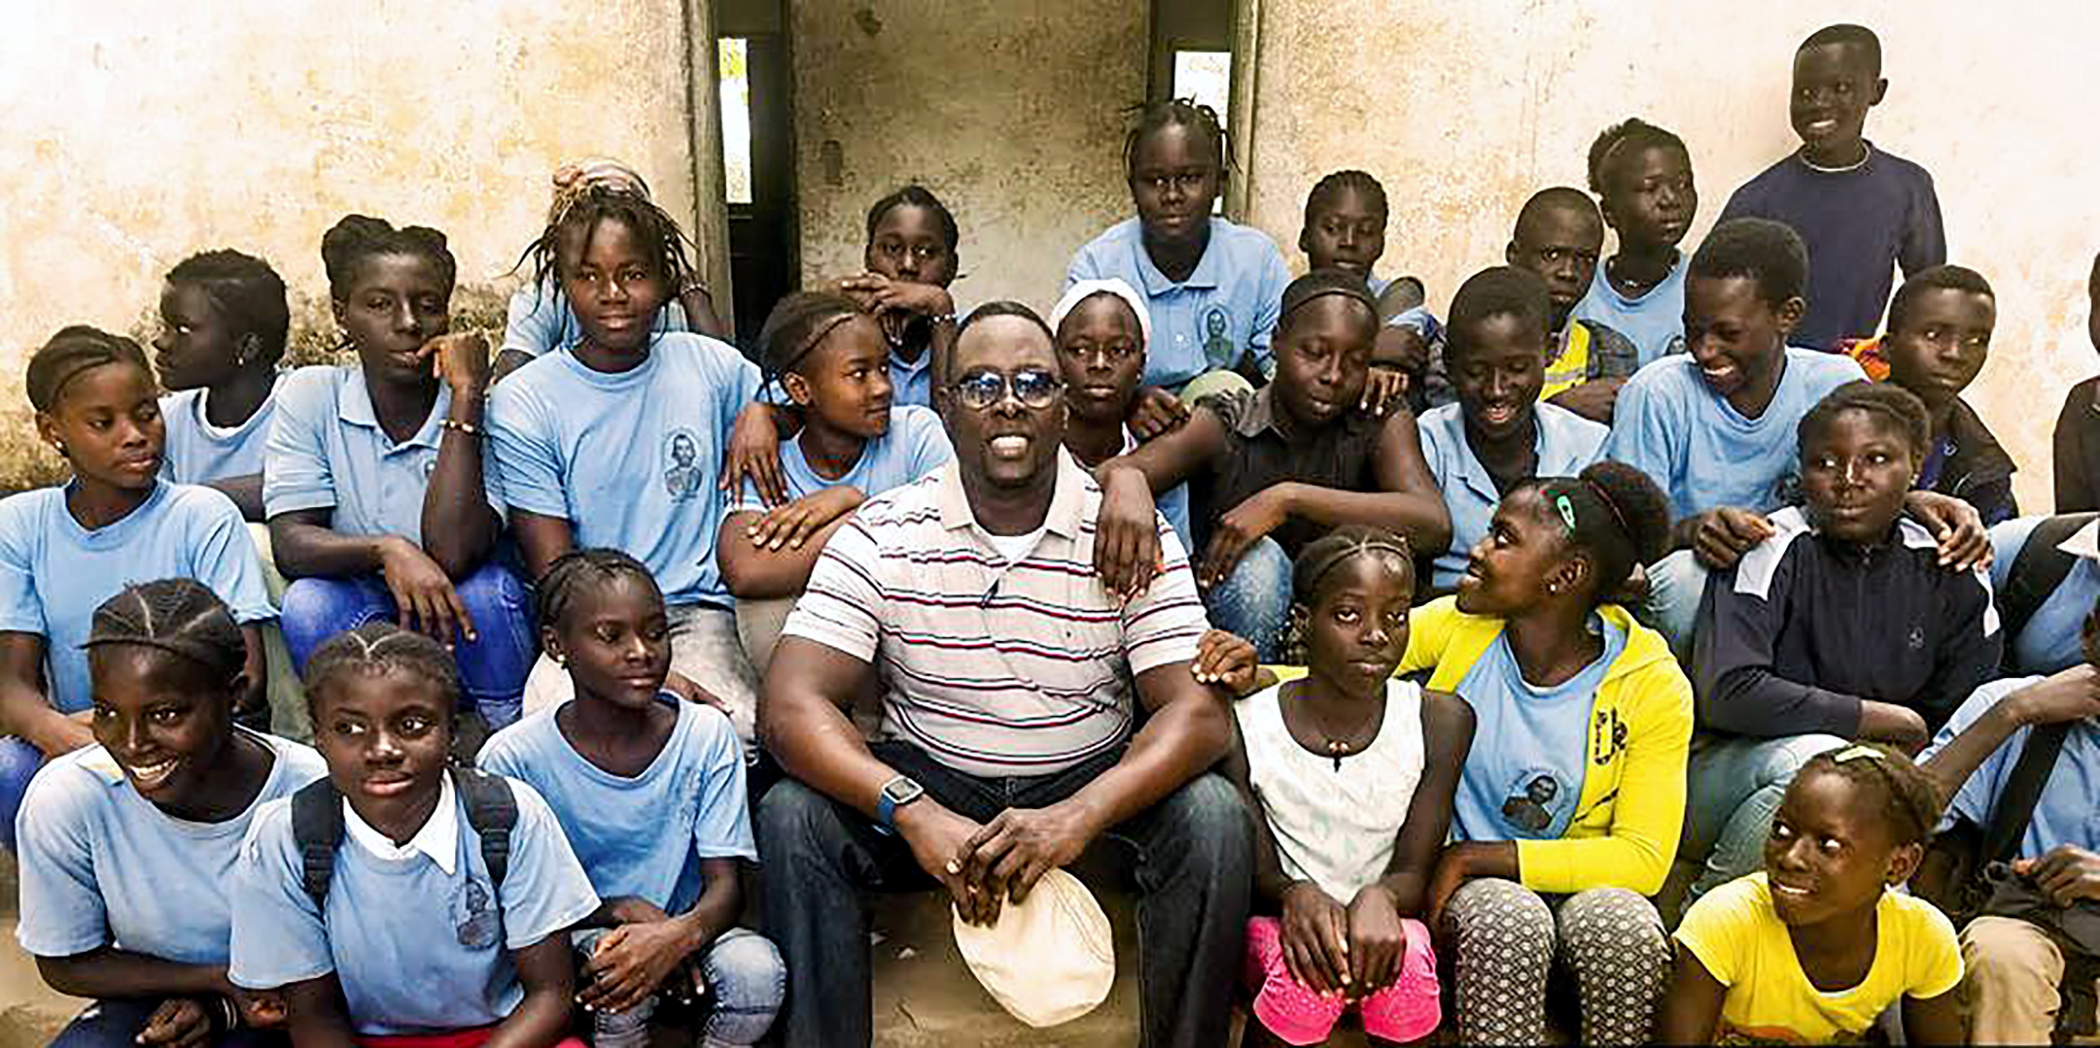 Silva in West Africa with kids.